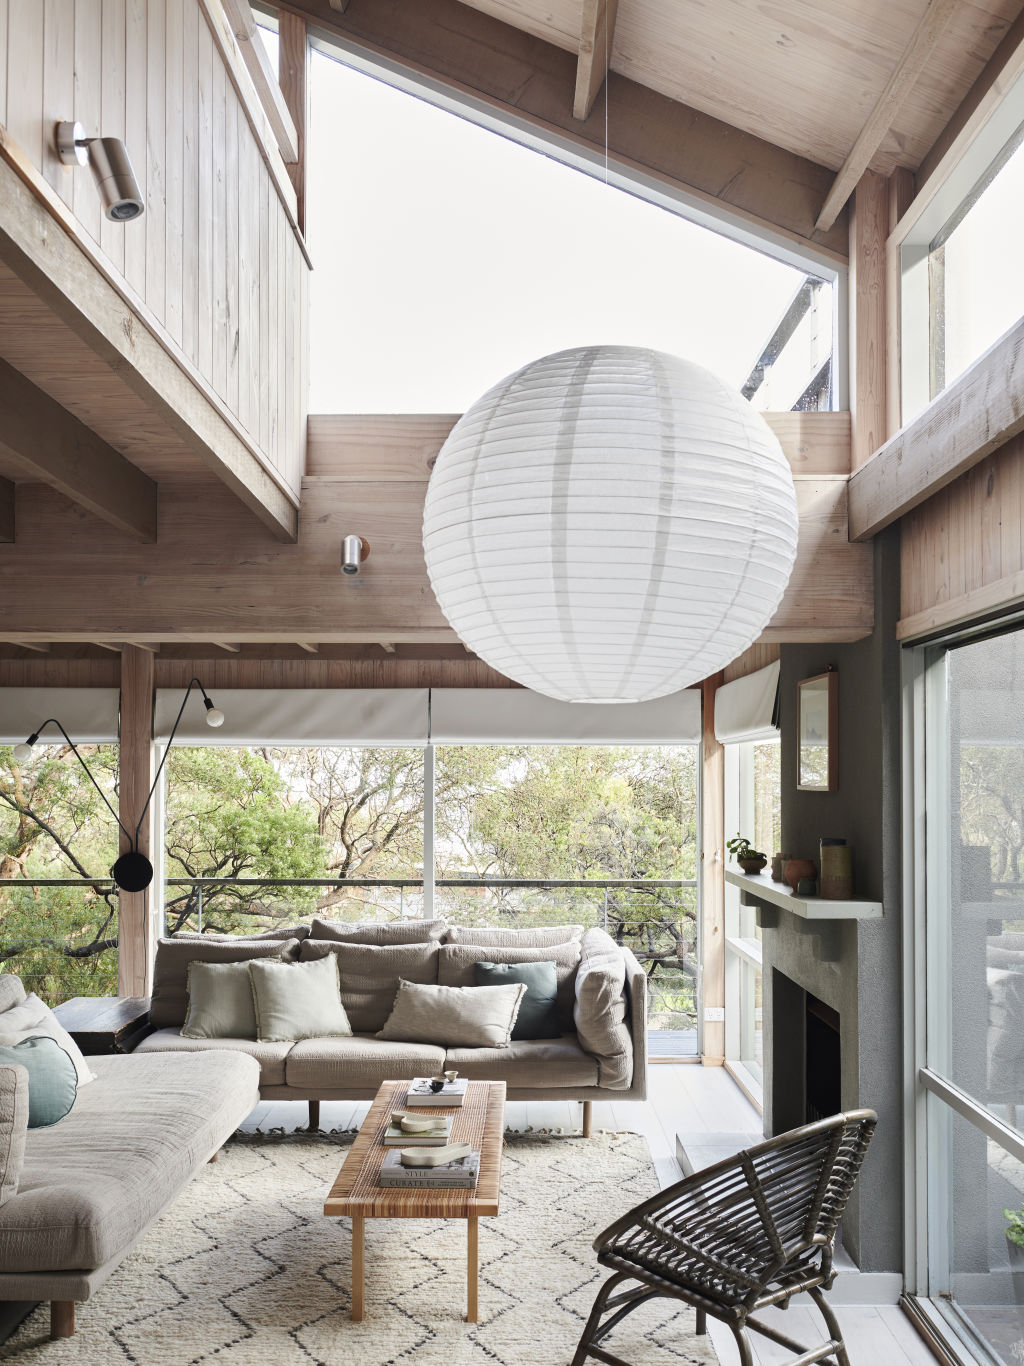 Renovations were made sparingly to keep the home as authentic as possible. Photo: Eve Wilson